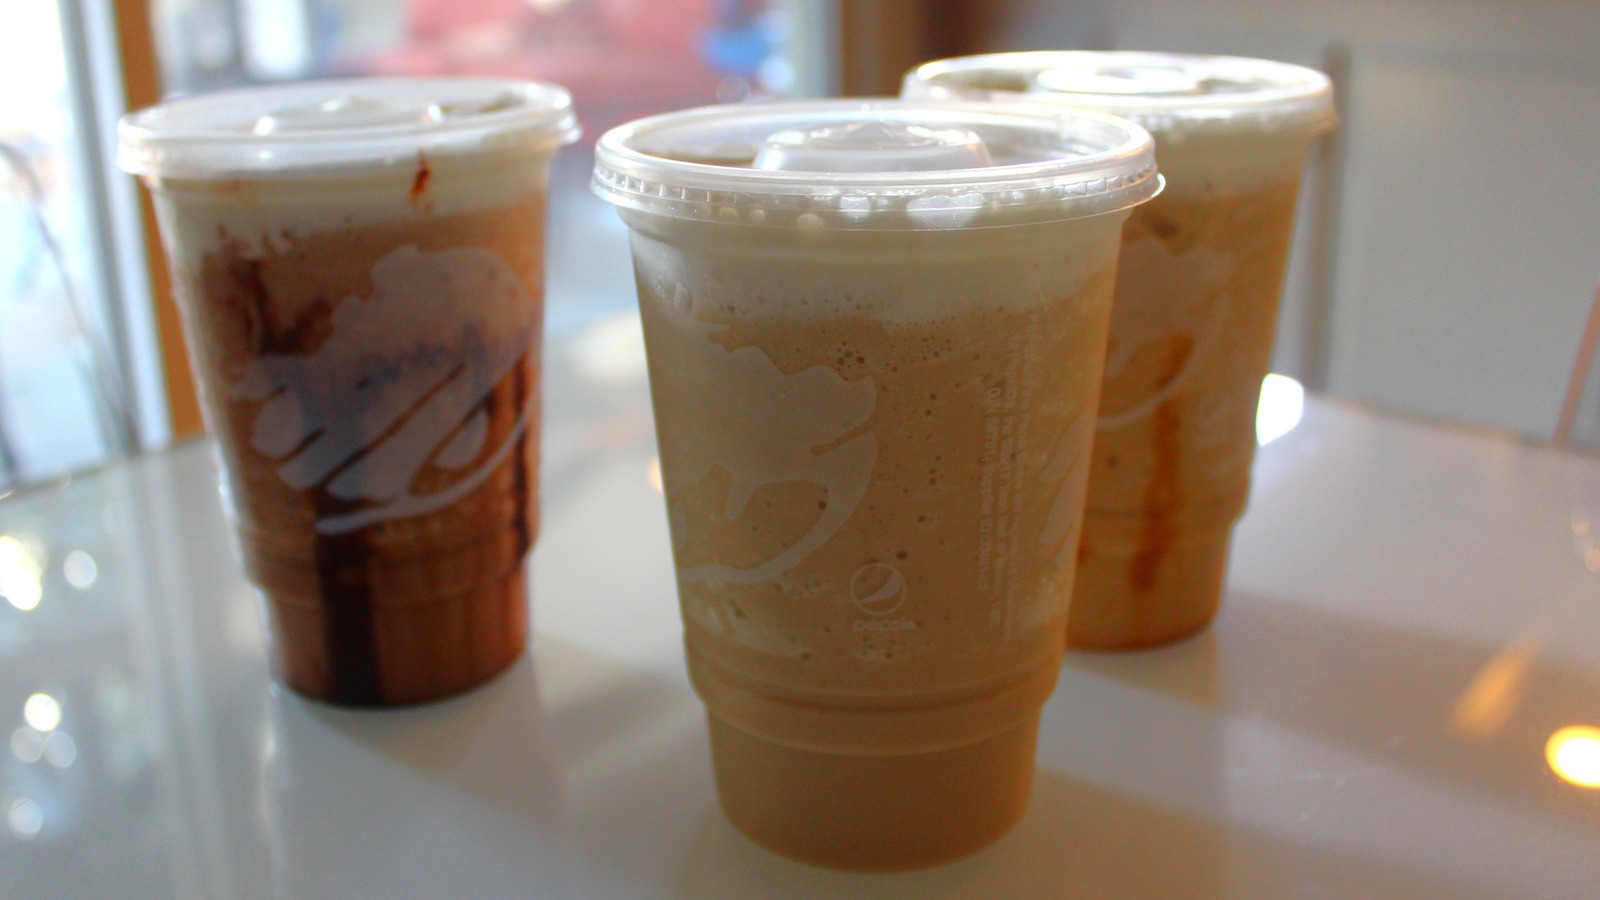 https://www.mashed.com/img/gallery/taco-bell-coffee-chillers-review-these-thick-and-creamy-drinks-deliver-perfect-level-of-sweetness/l-intro-1702770180.jpg